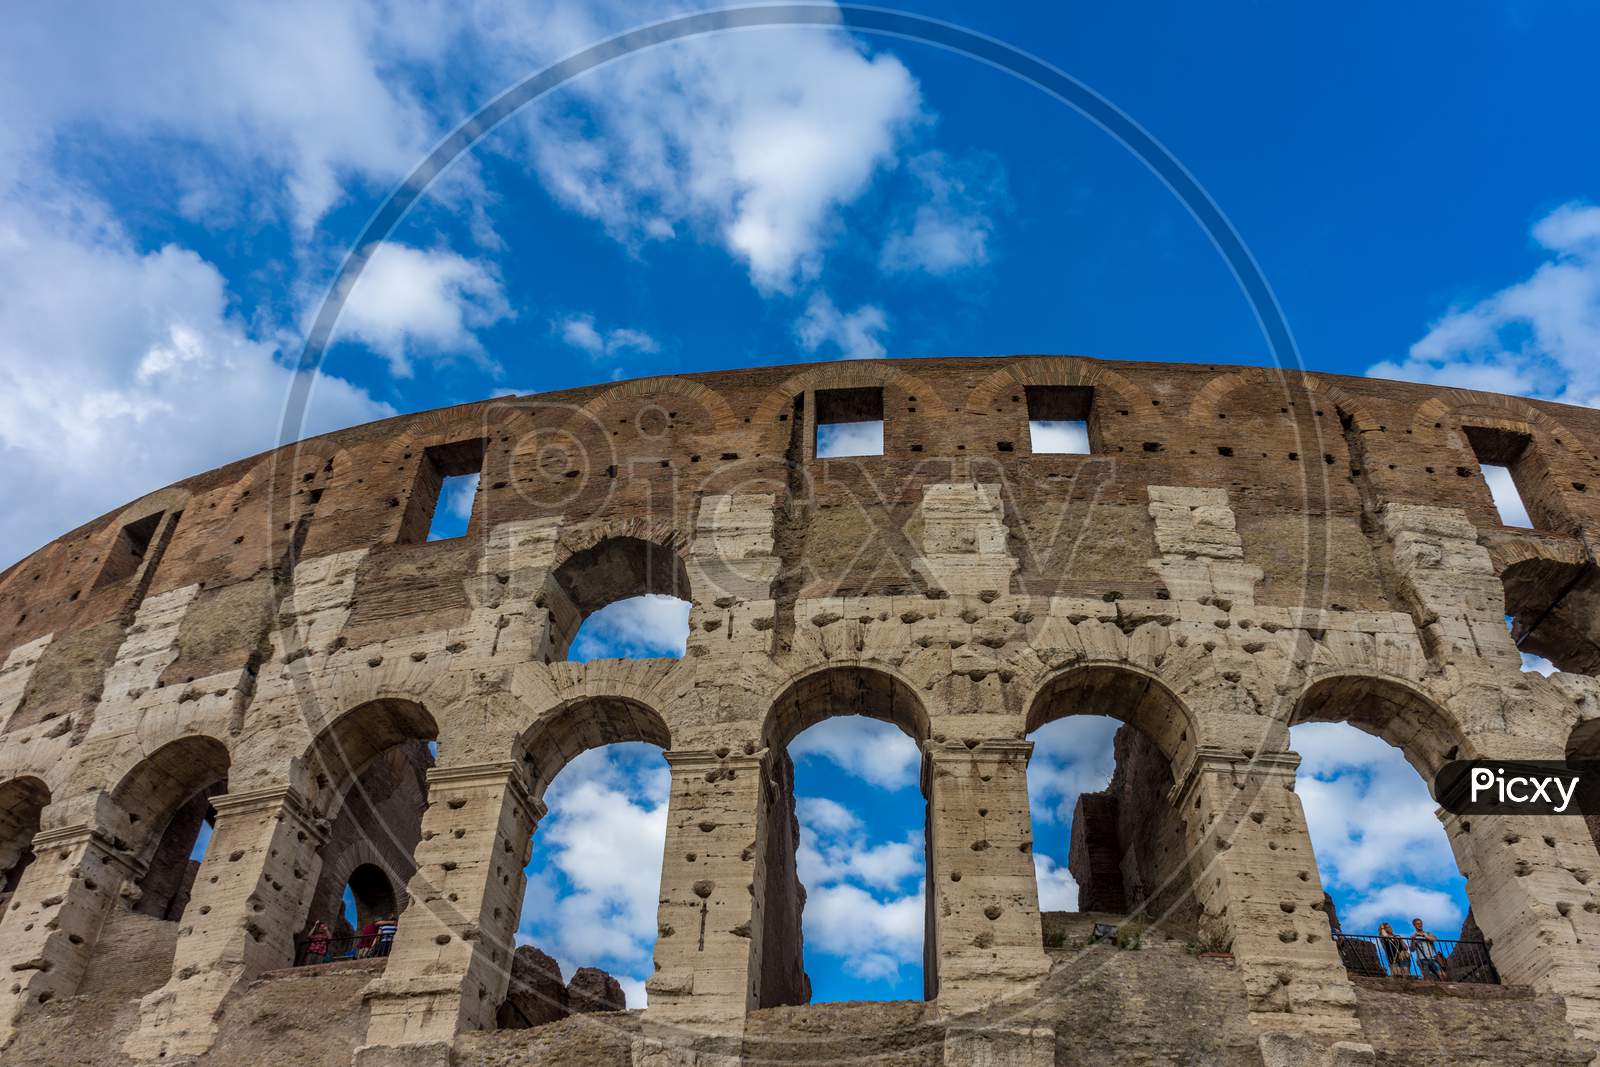 Rome, Italy - 23 June 2018: Facade Of The Great Roman Colosseum (Coliseum, Colosseo), Also Known As The Flavian Amphitheatre